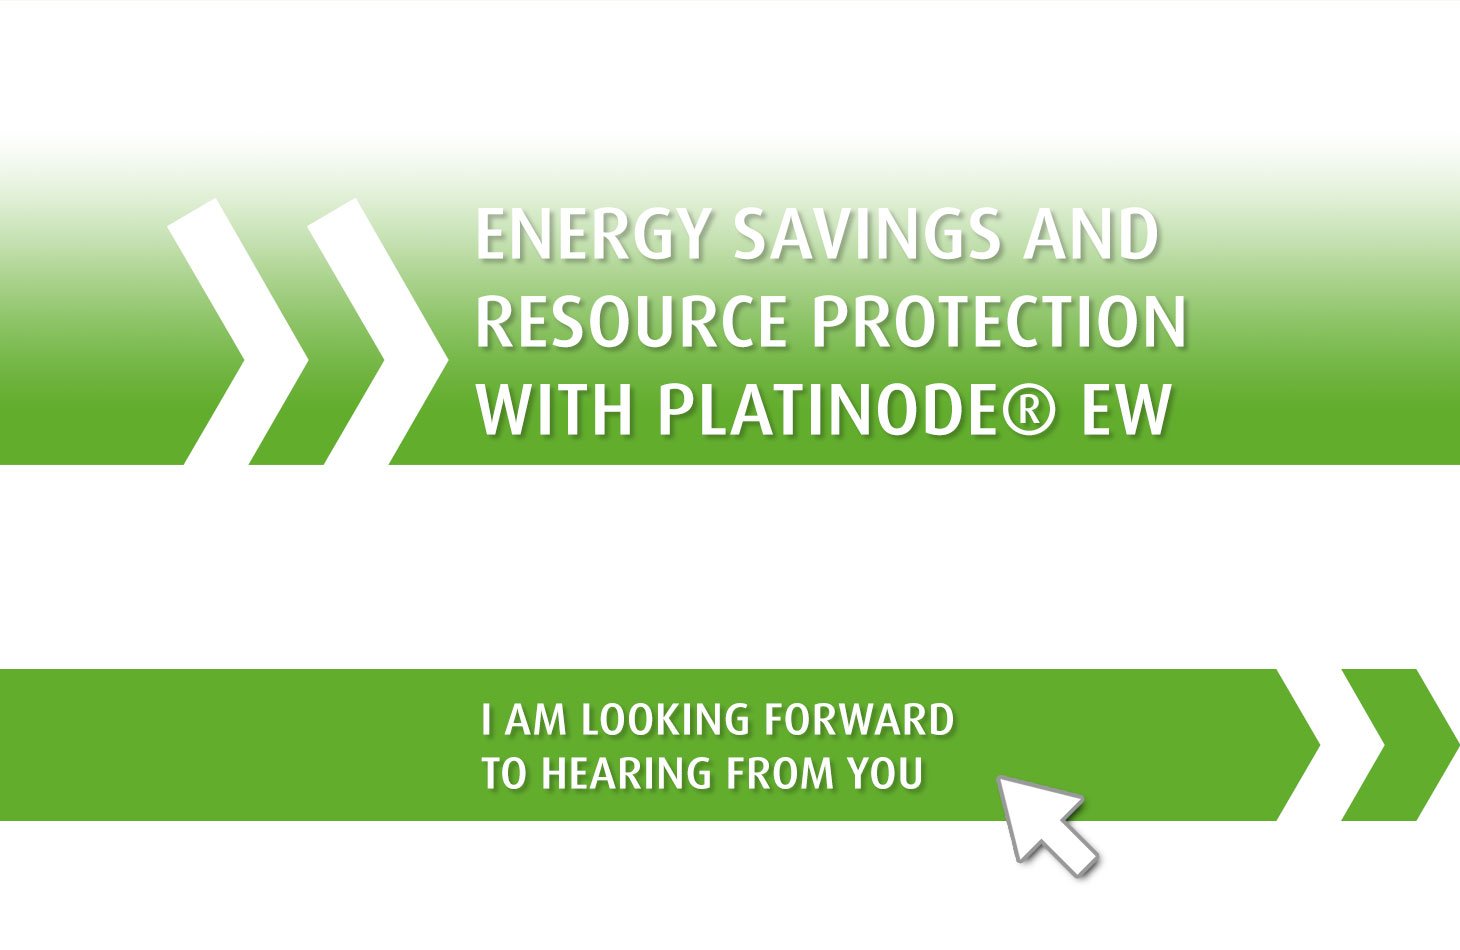 PLATINODE® EW - MMO anodes support the recovery of metals from wastewater - Contact